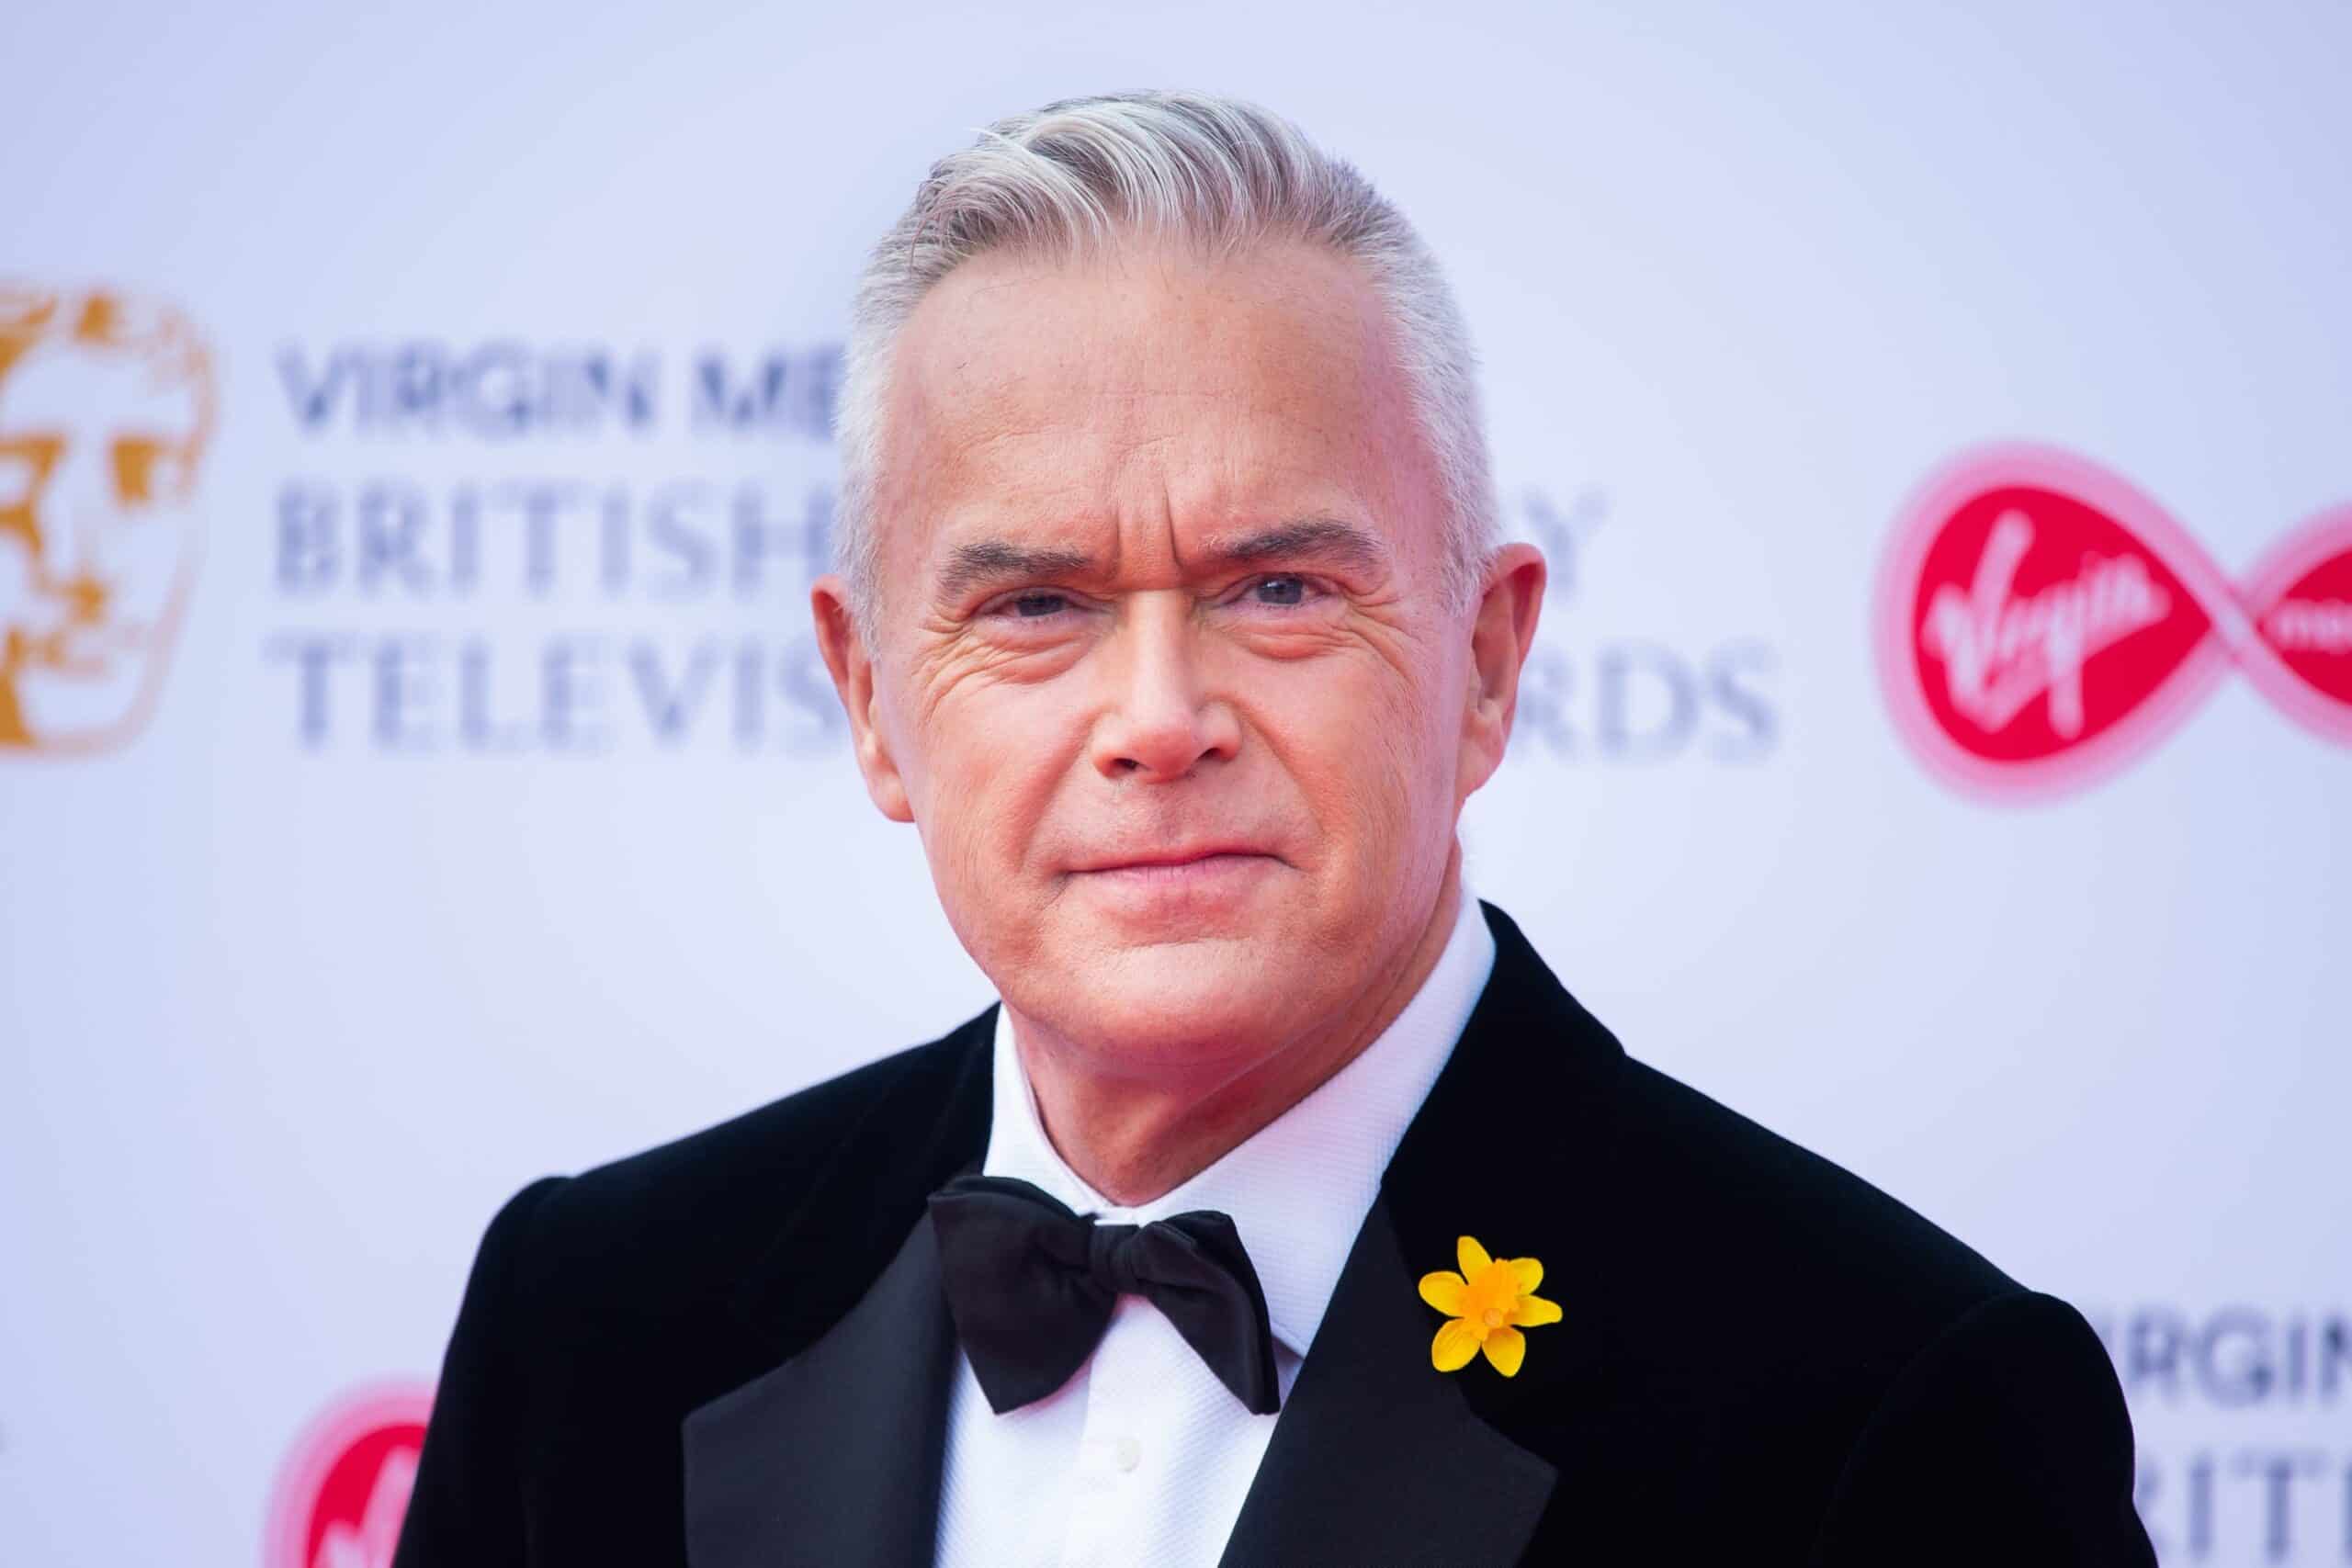 Statement on Huw Edwards from wife Vicky Flind in full